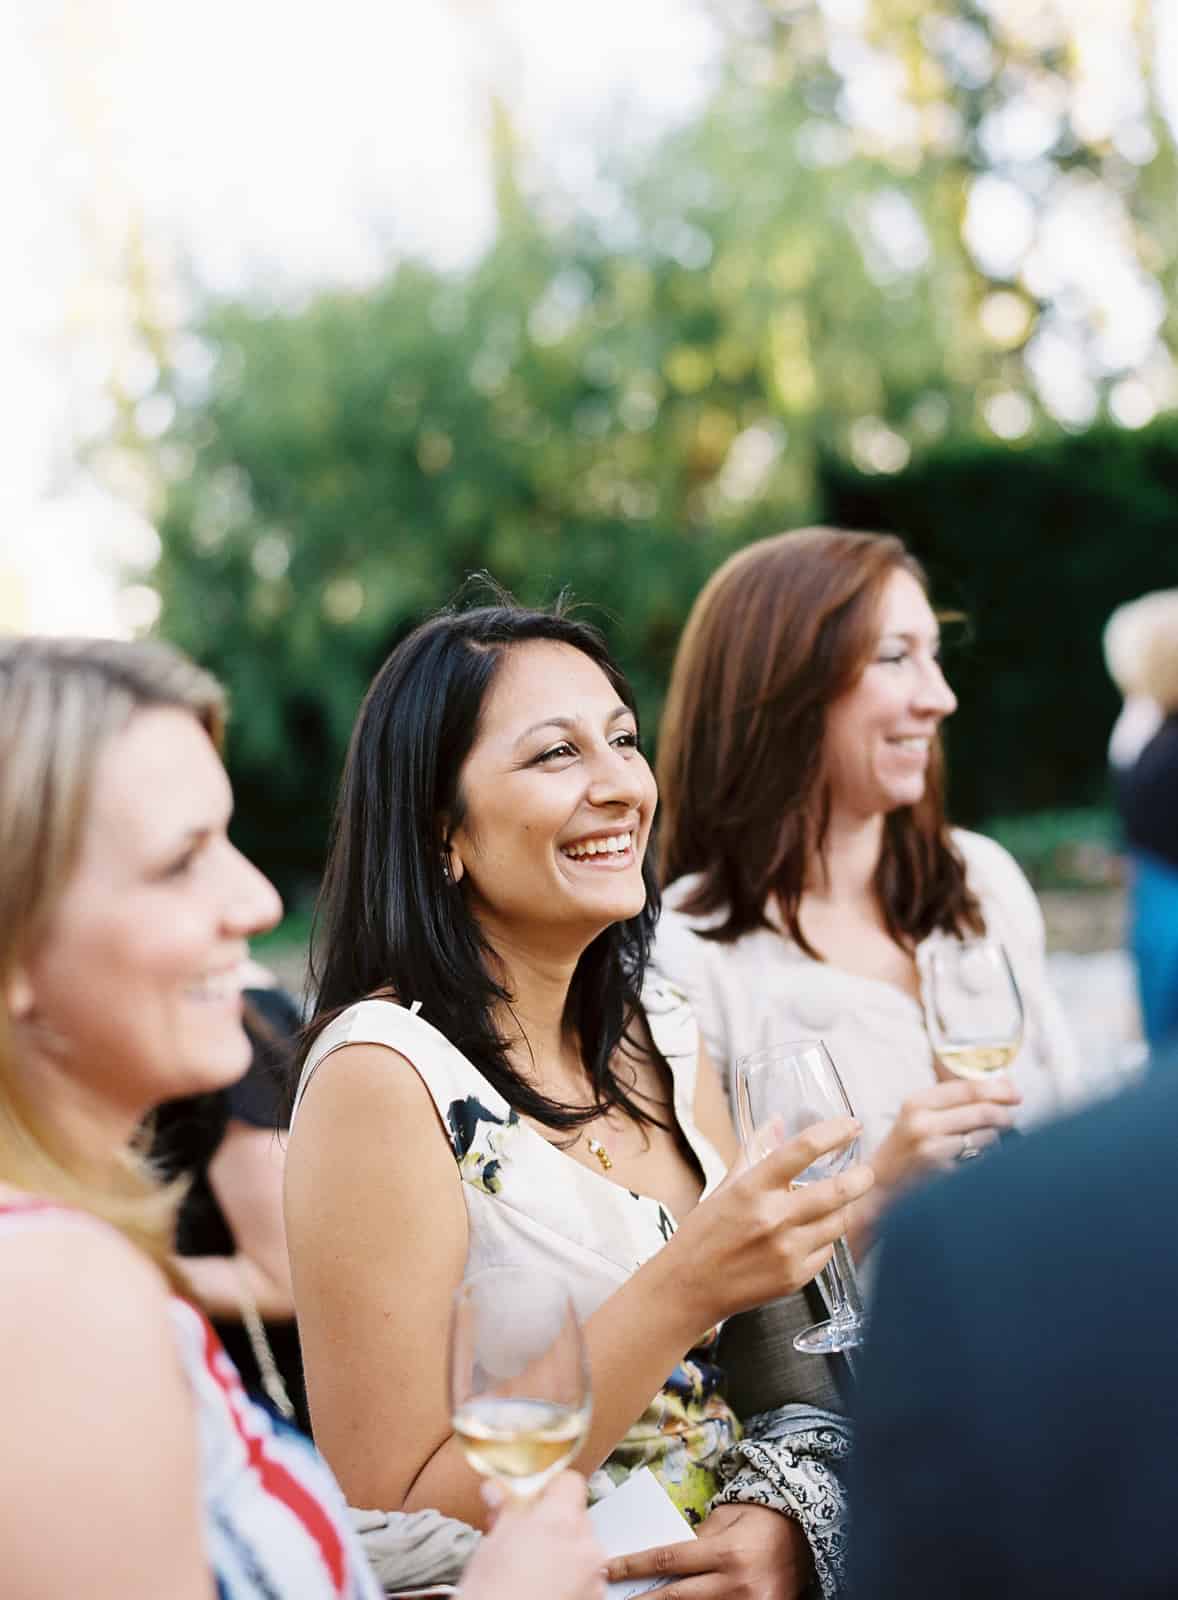 Smiling guests drinking white wine